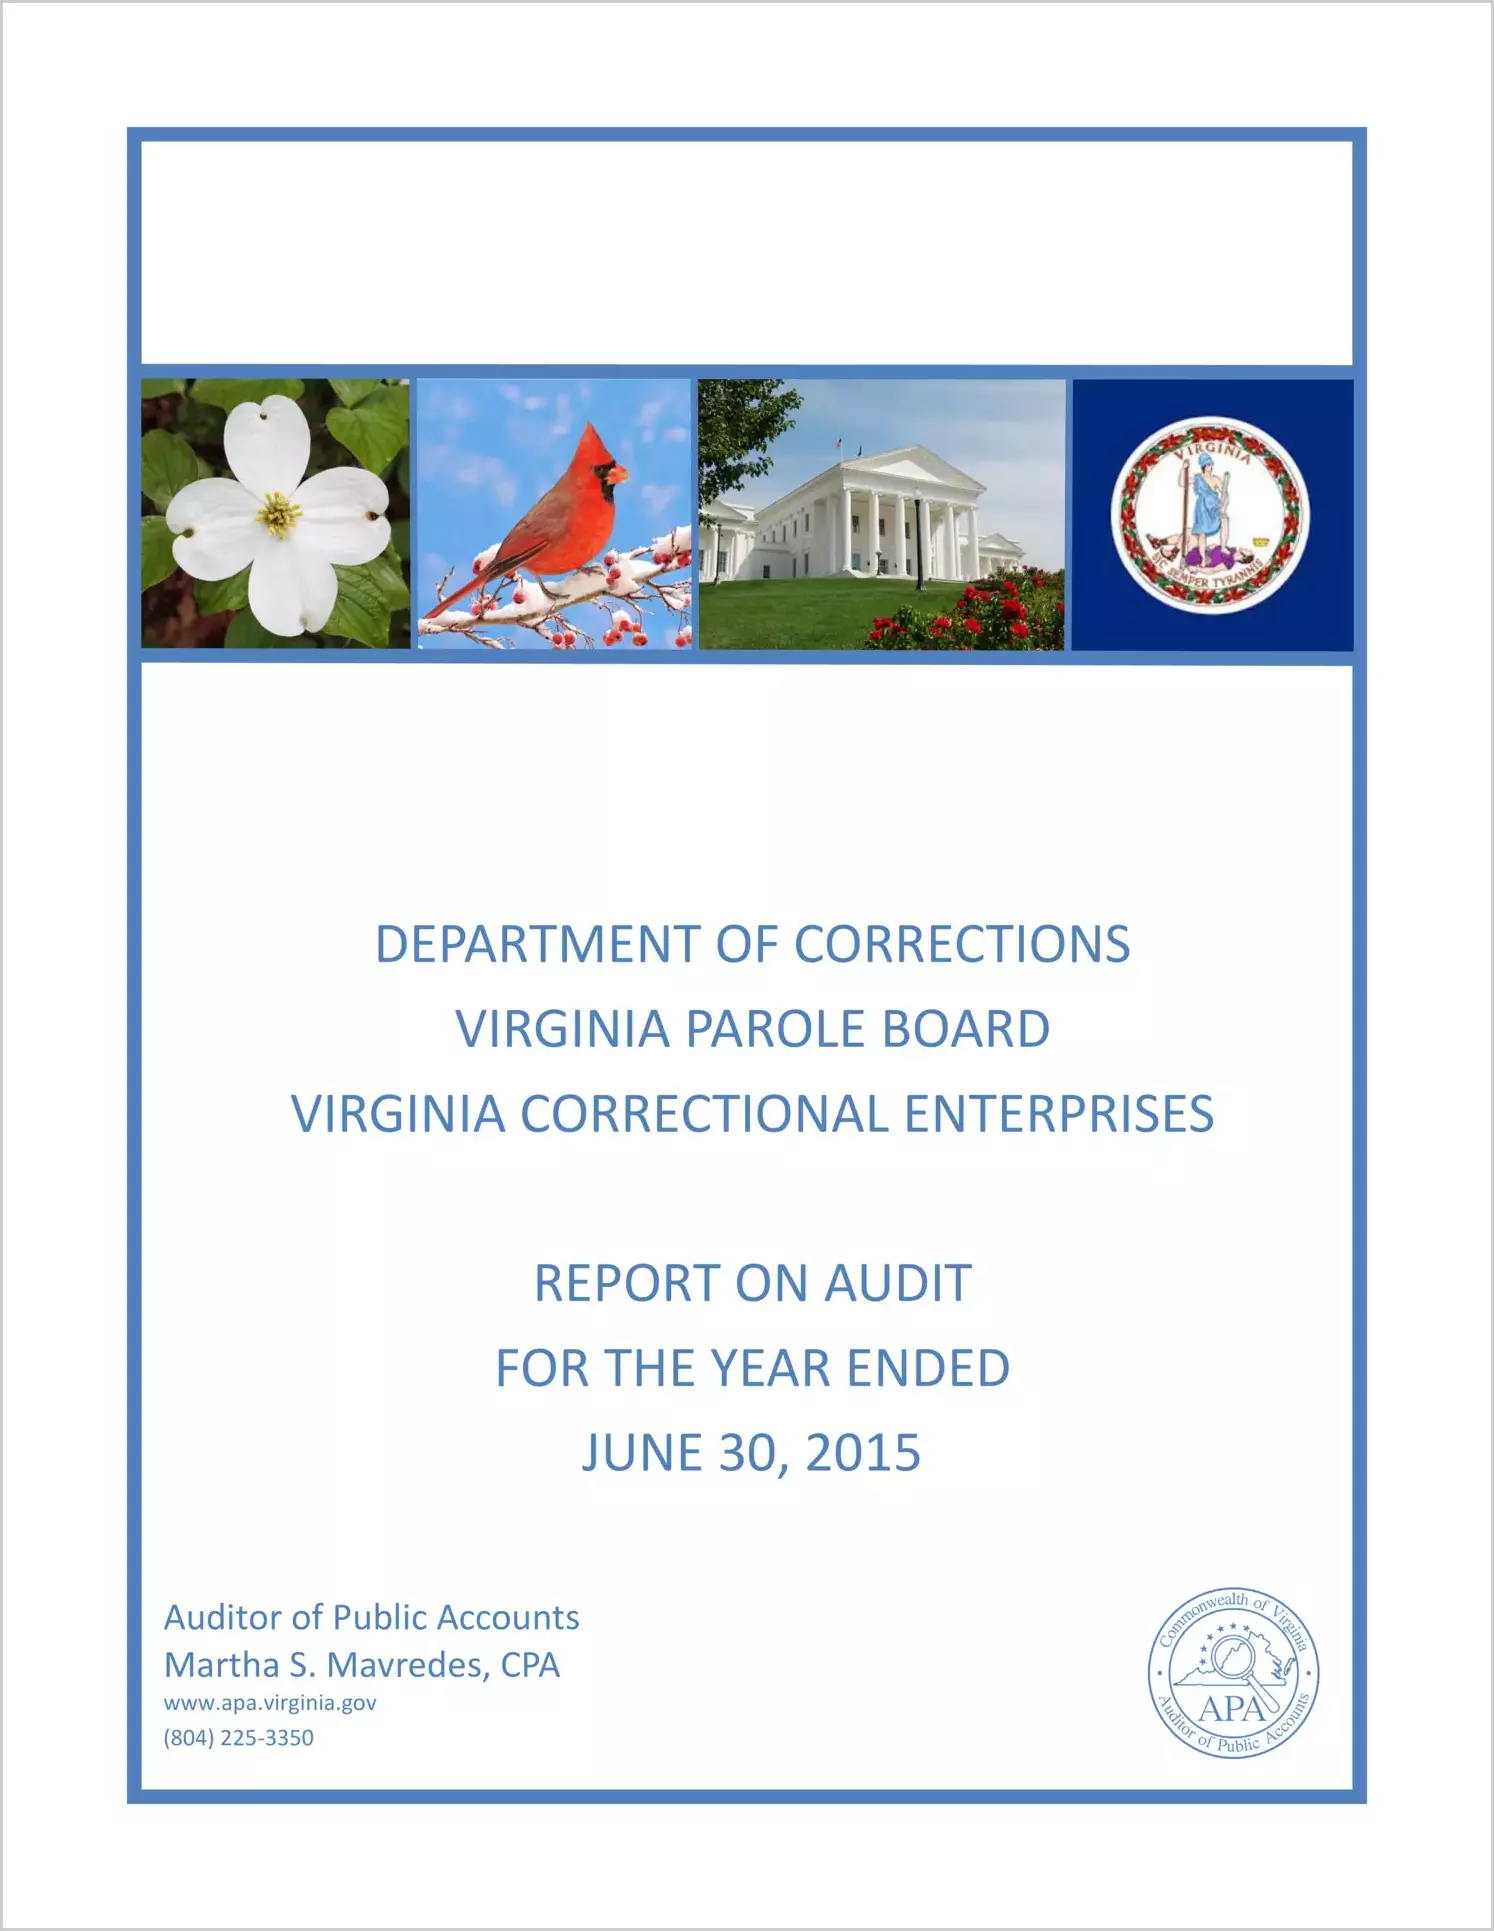 Department of Corrections, Virginia Parole Board, and Virginia Correctional Enterprises Report on Audit for Fiscal Year Ended June 30, 2015